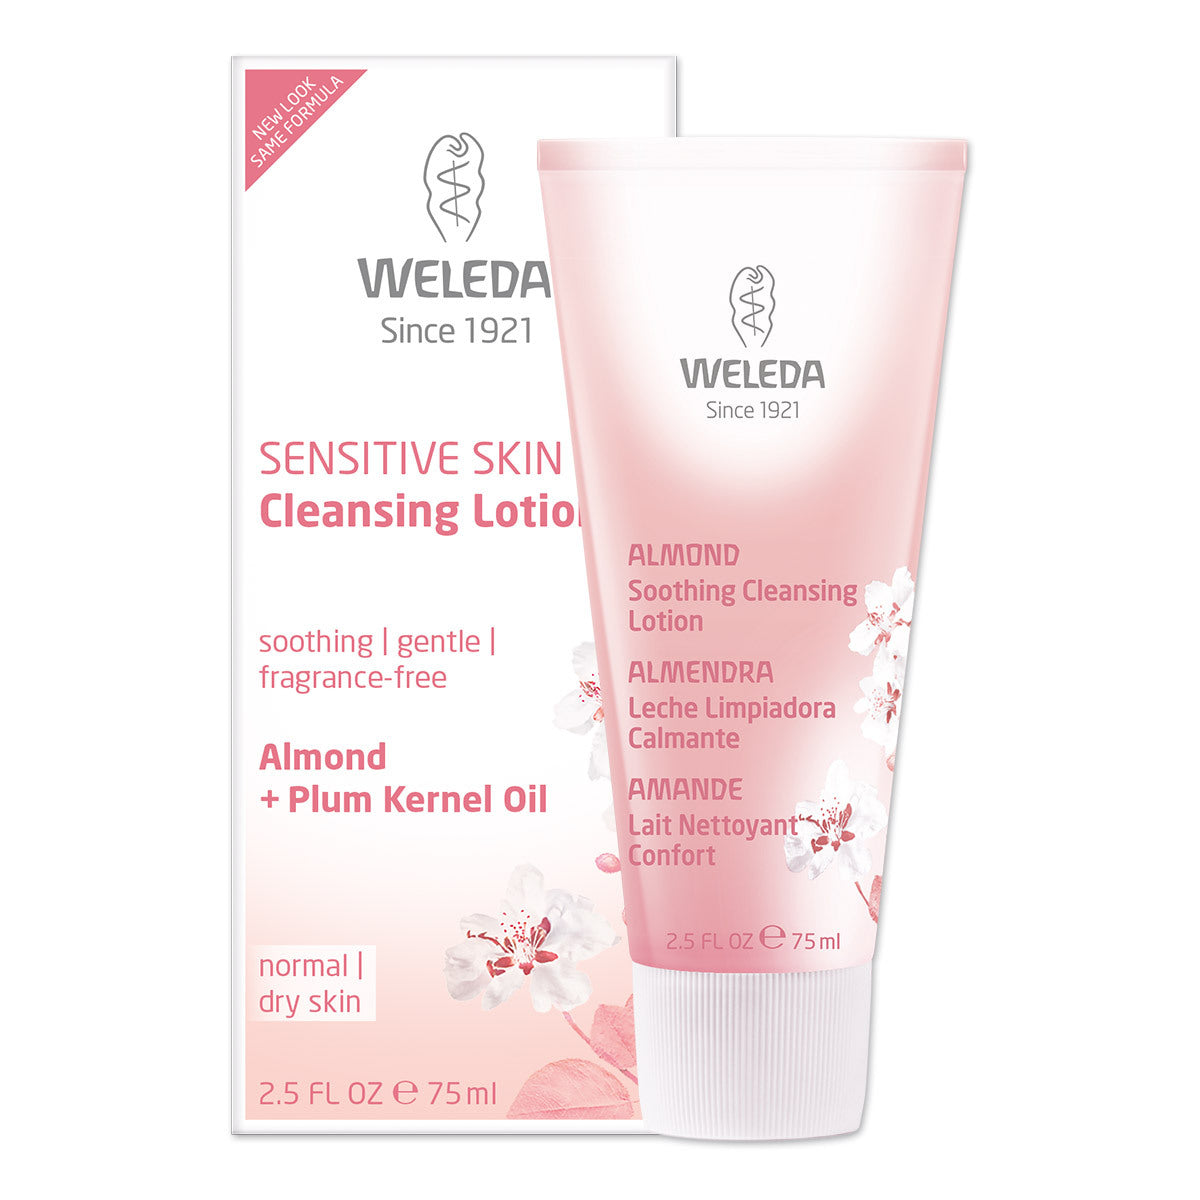 Primary image of Sensitive Skin Cleansing Lotion